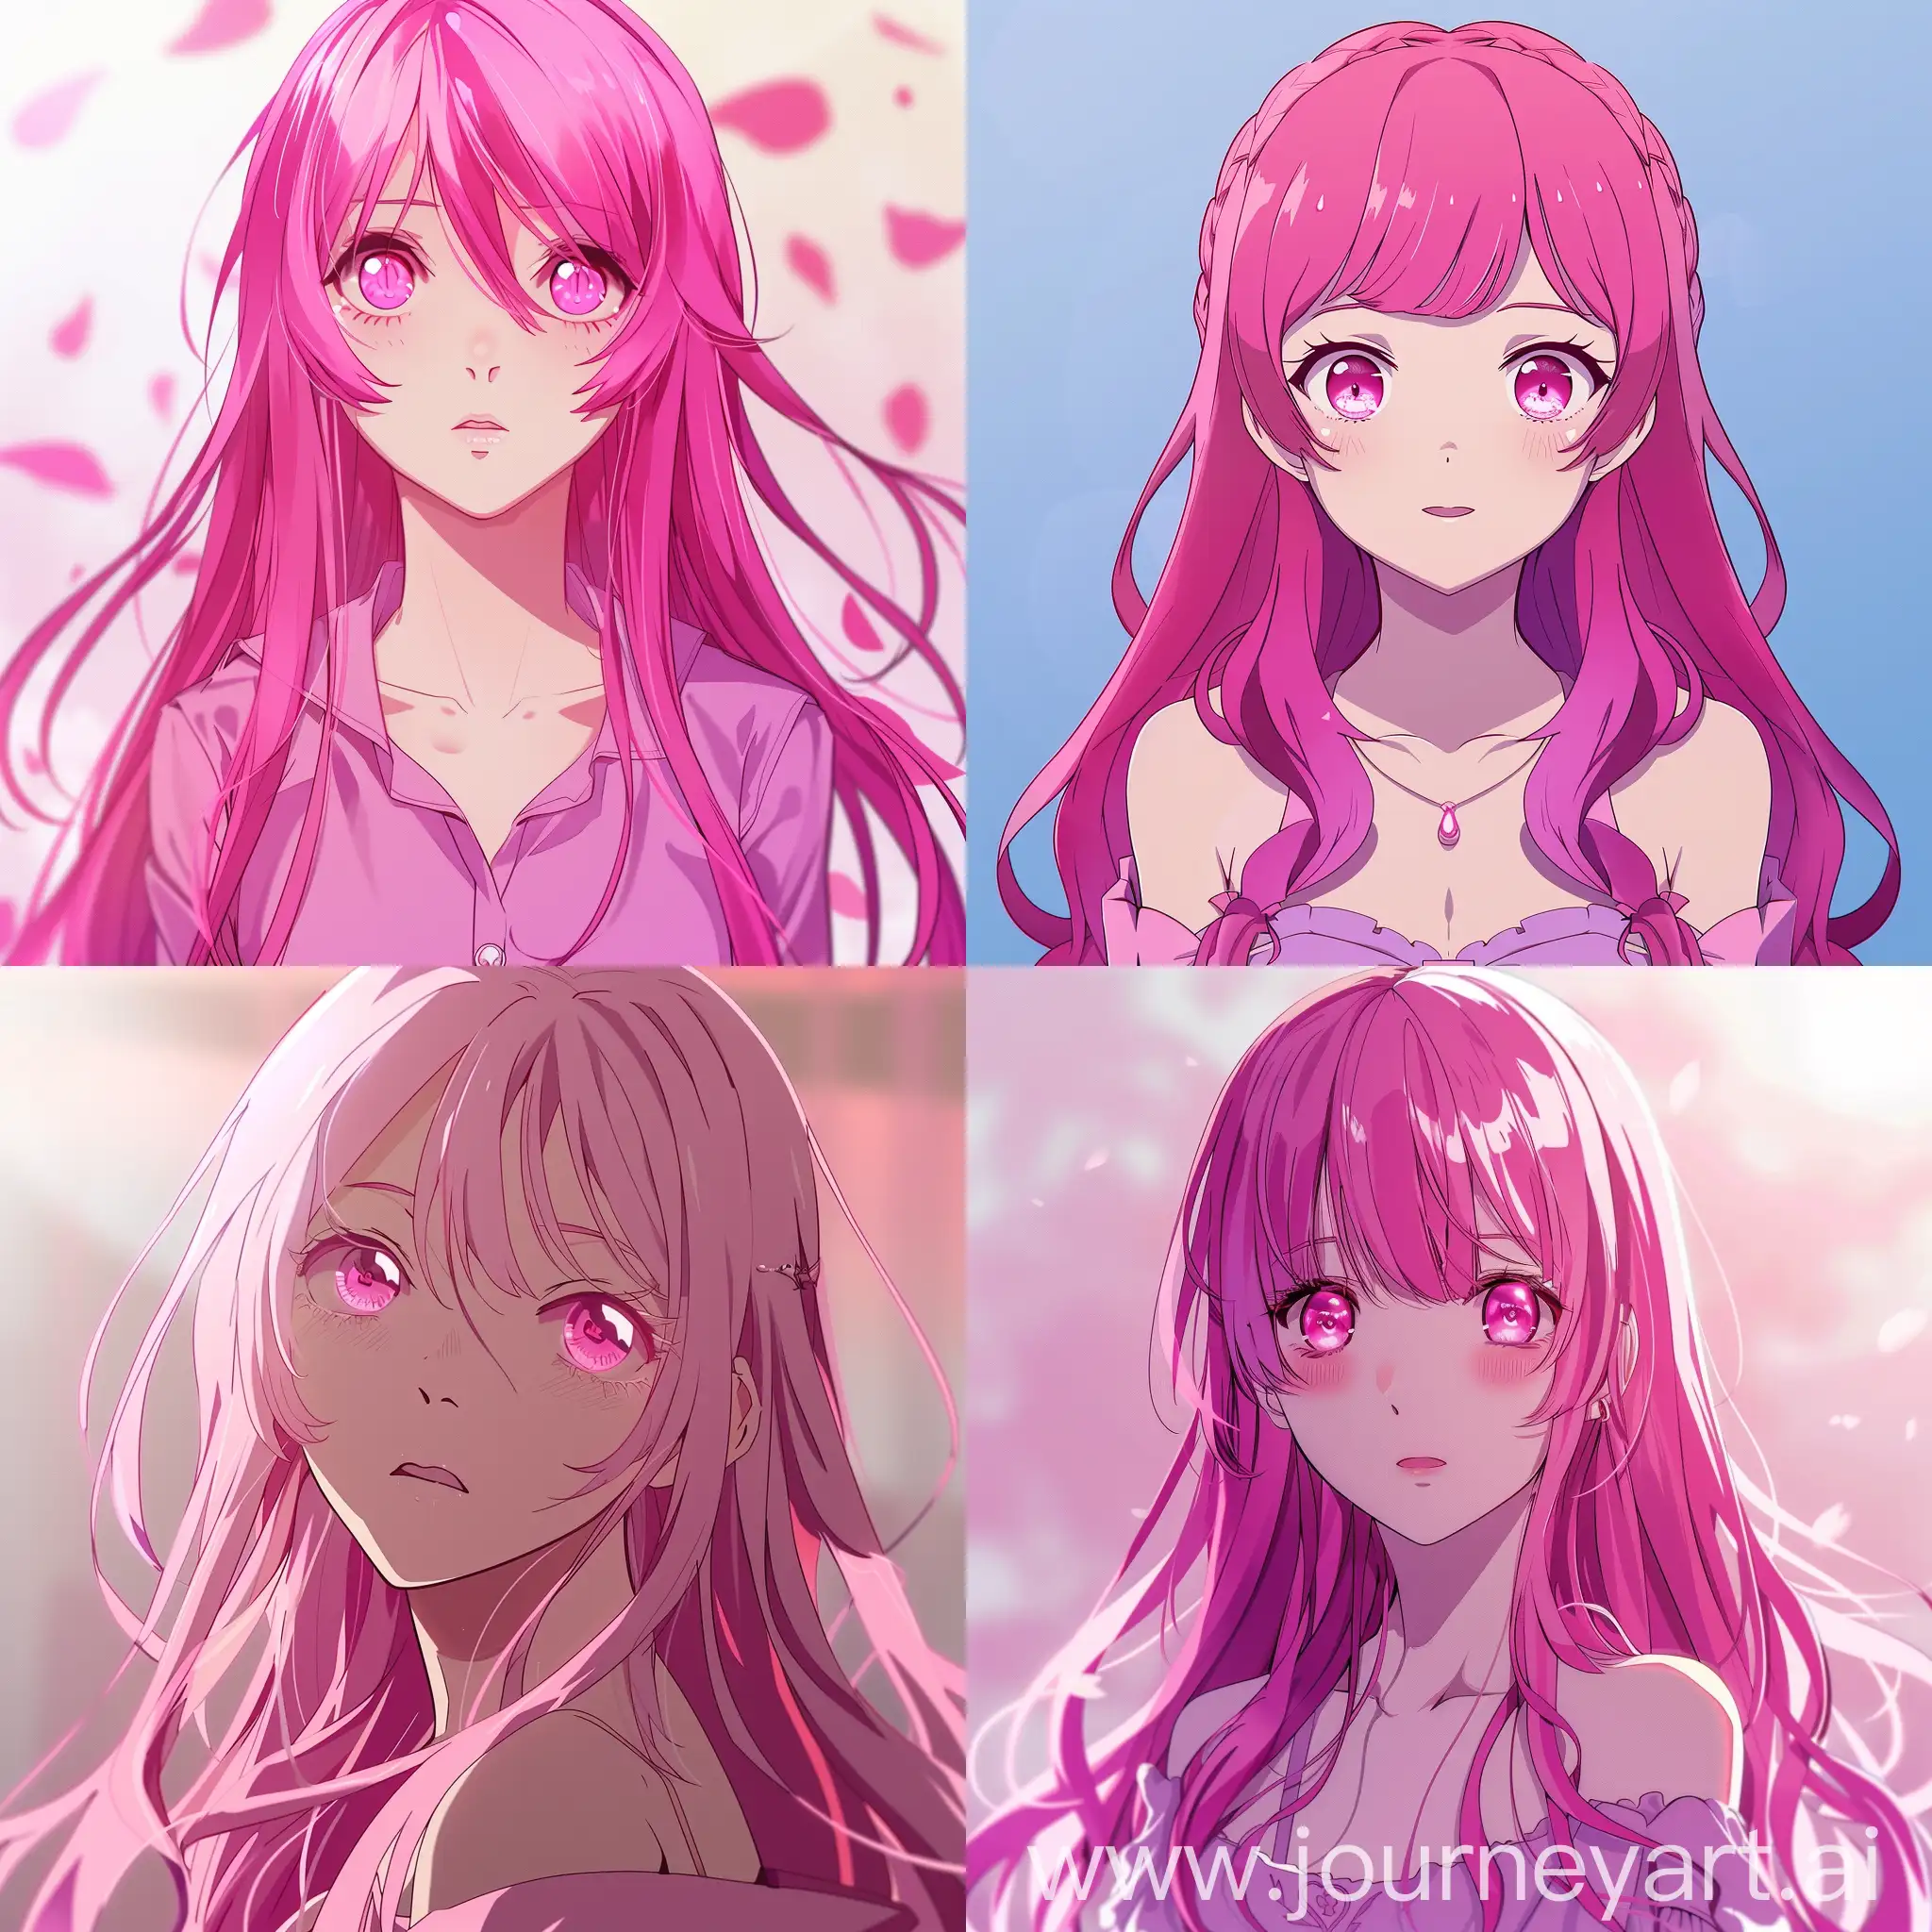 Anime-Style-Portrait-of-a-Young-Woman-with-Long-Pink-Hair-and-Feminine-Outfit